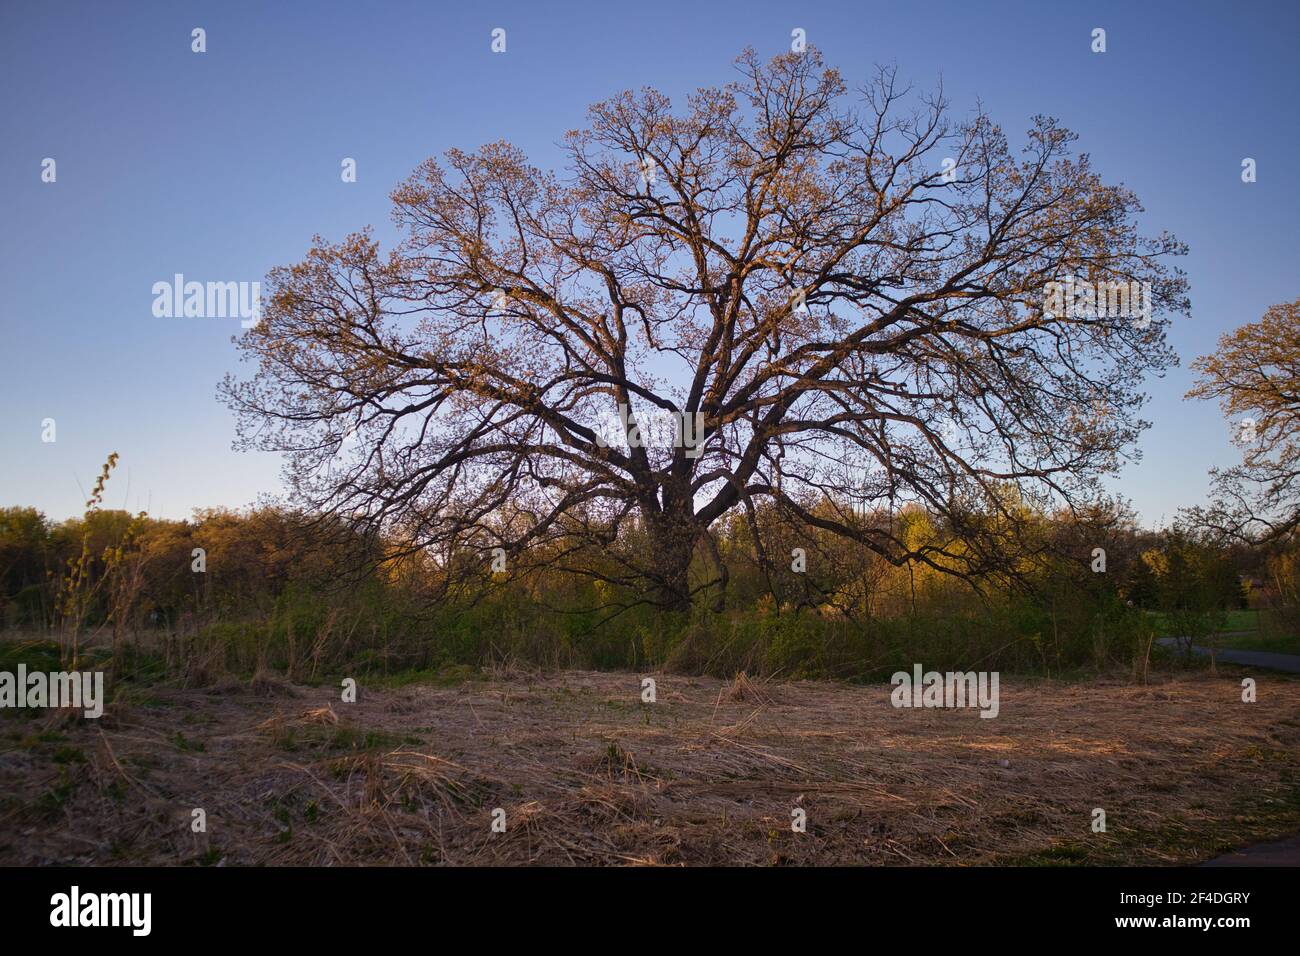 One oak tree in spring with buds on its branches. Series of four seasons. Stock Photo